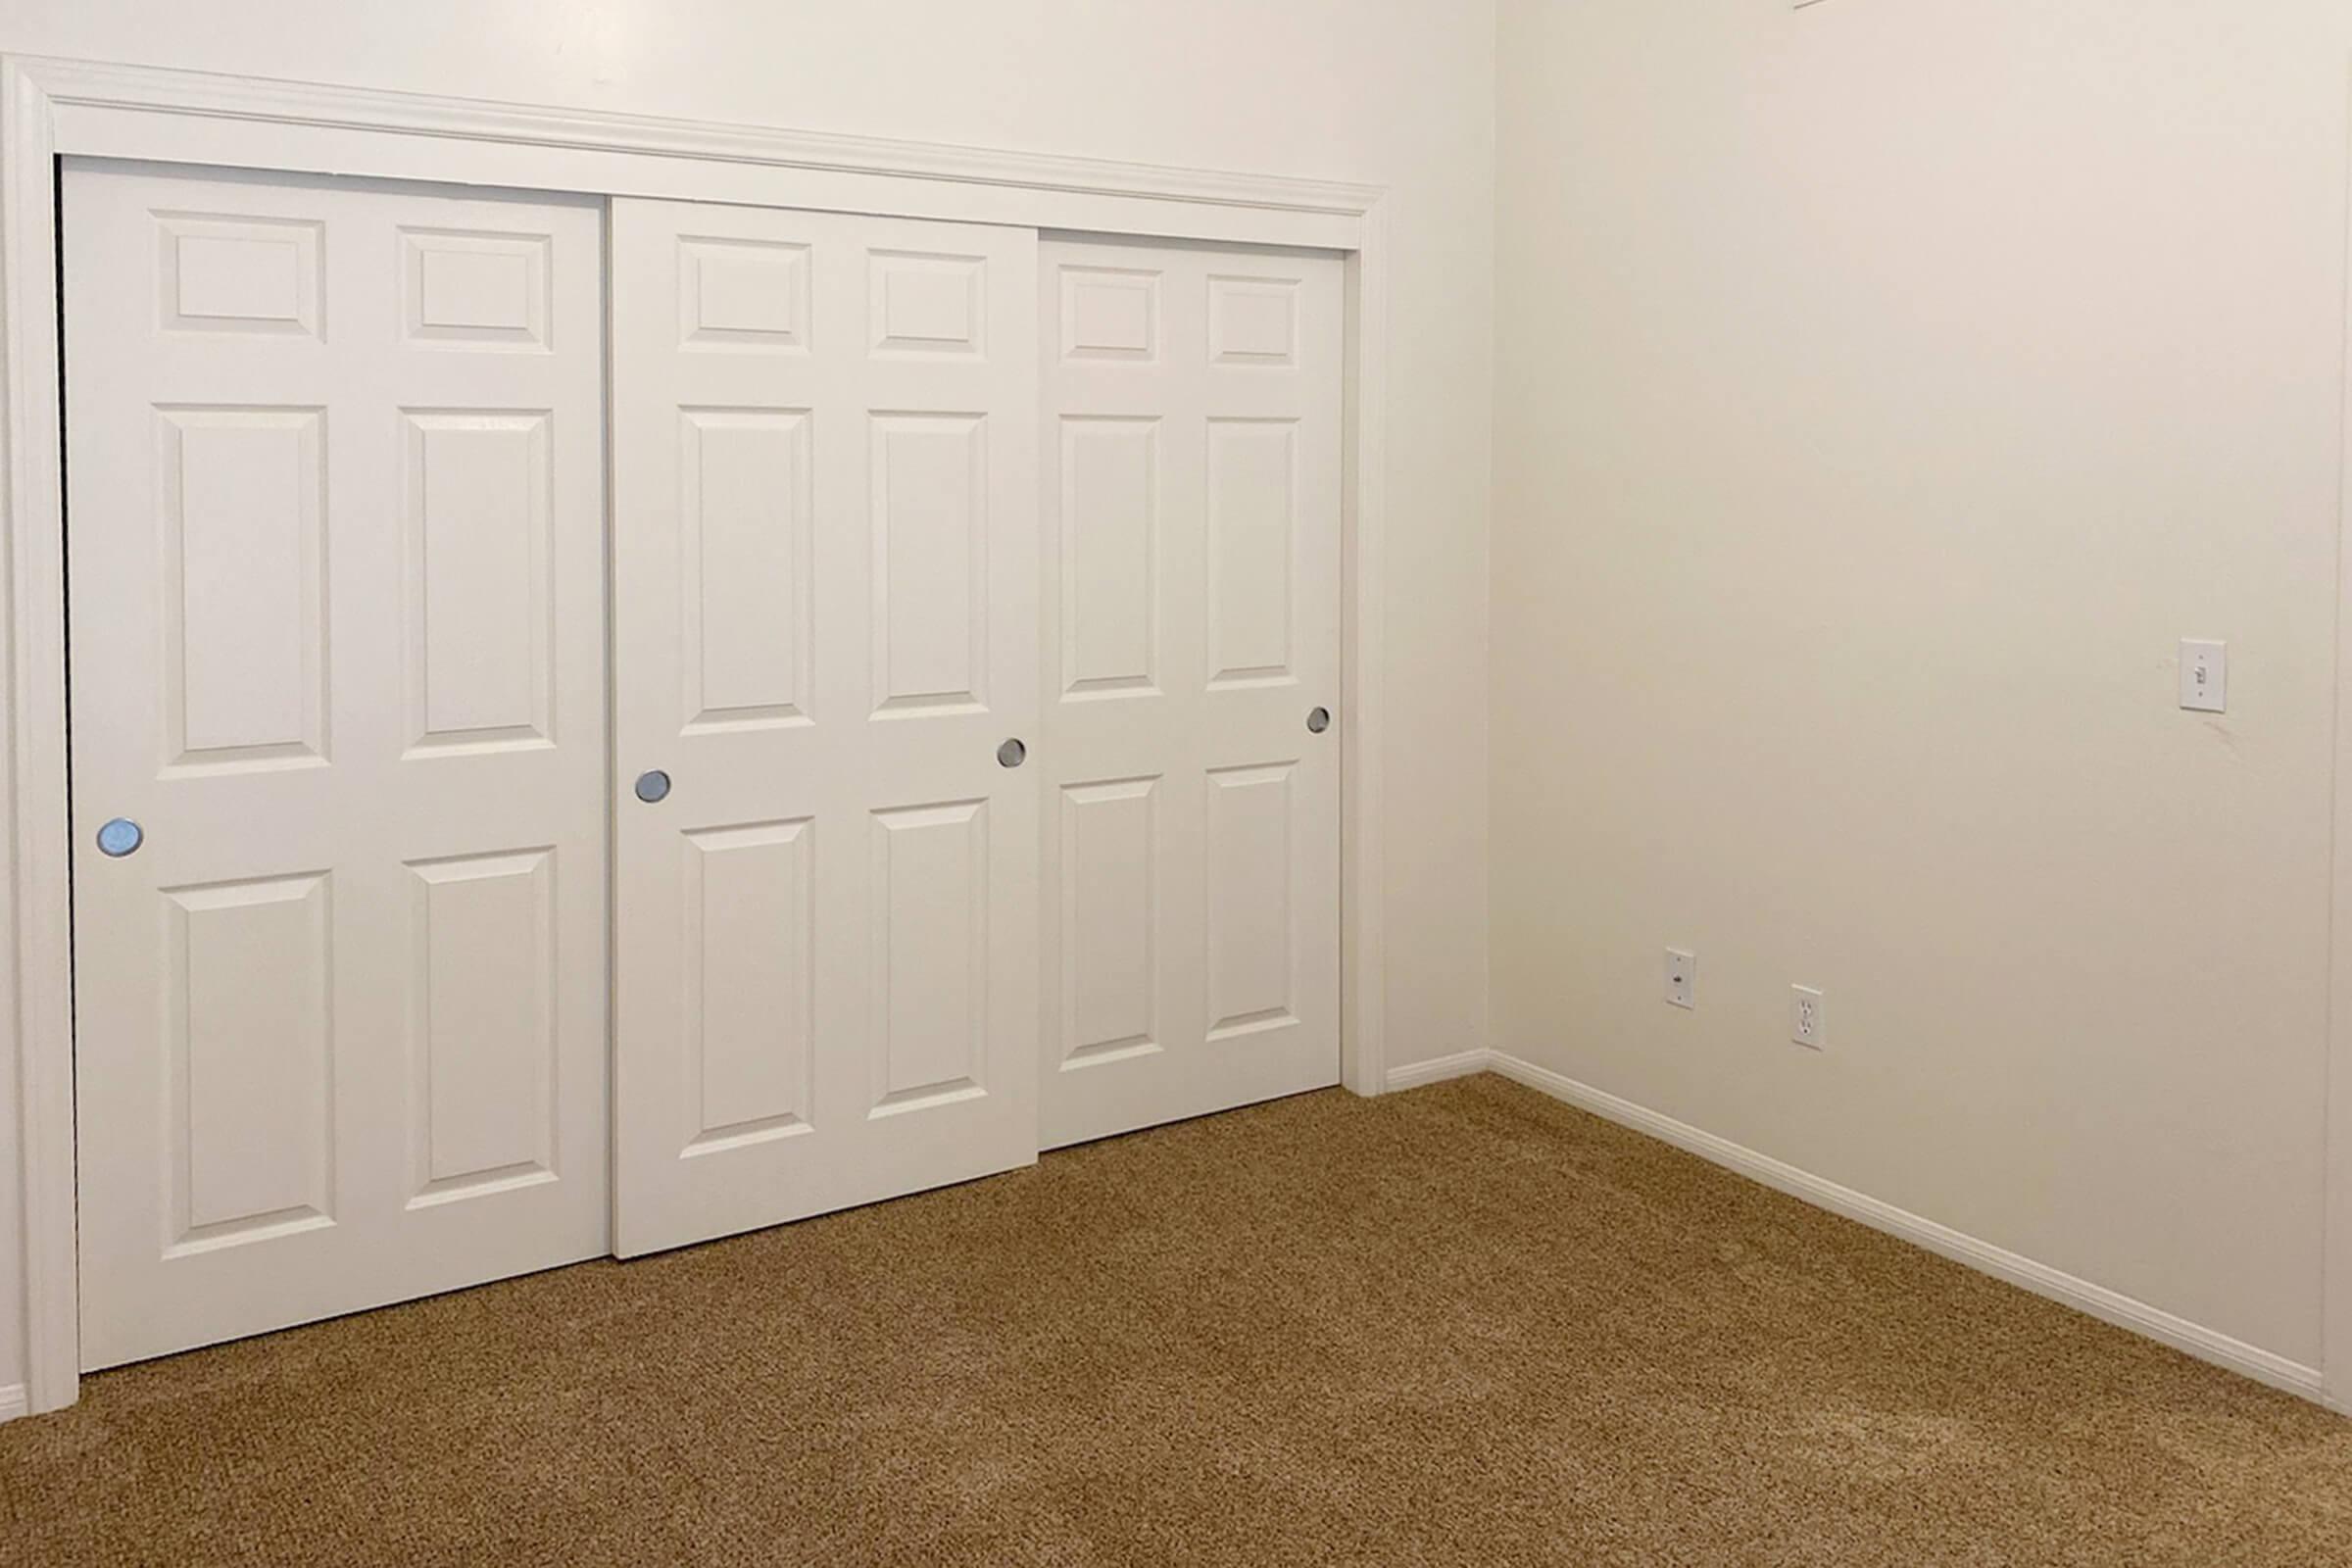 vacant bedroom with carpet and closed closet doors